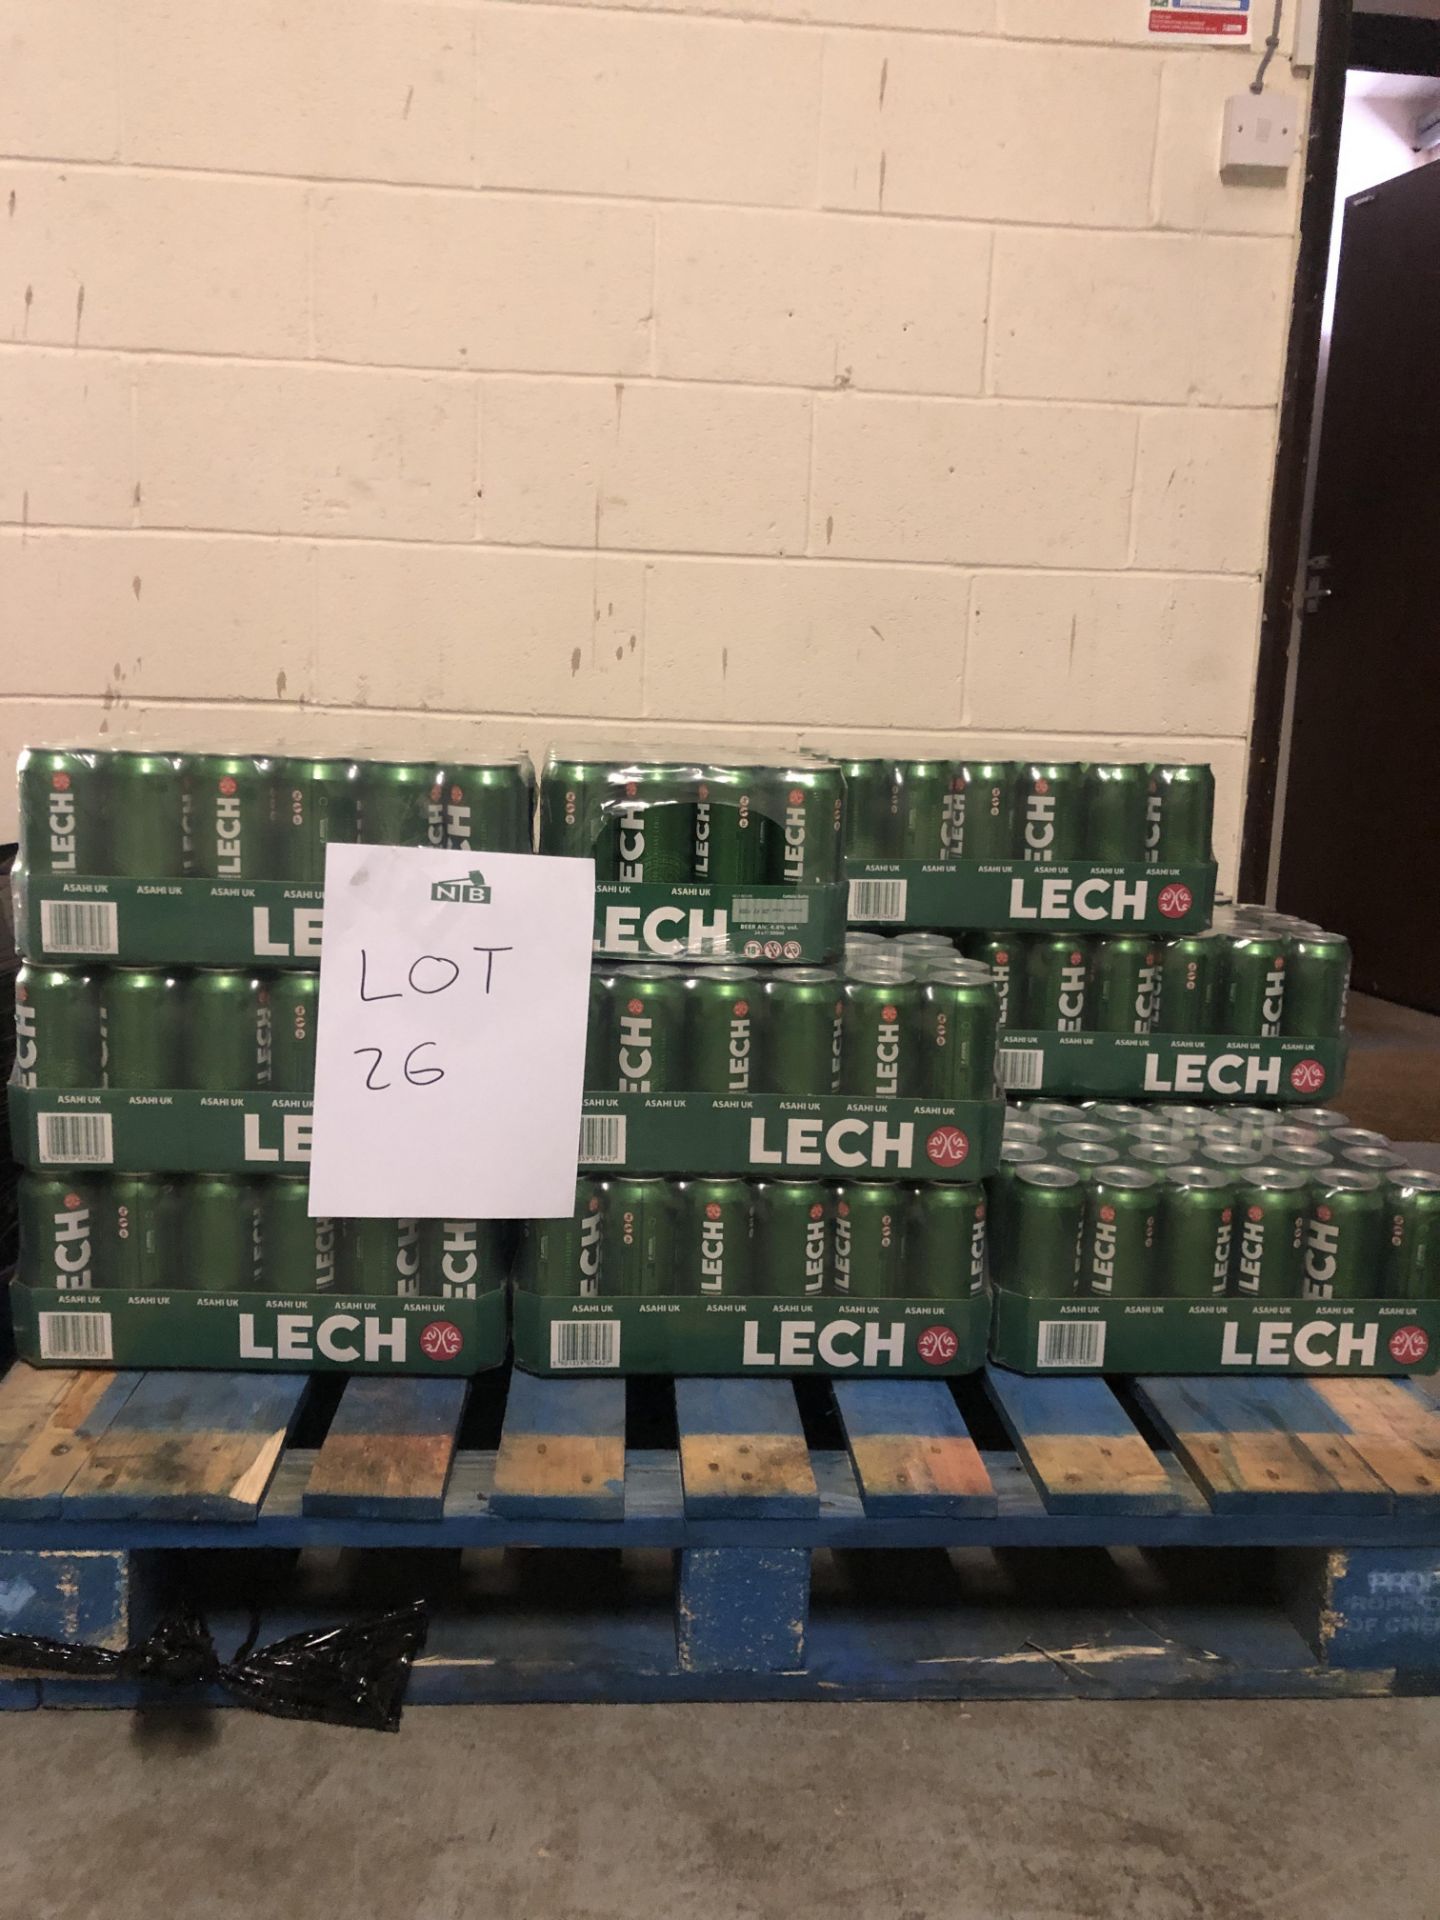 Lech Premium Lager - (10 x Cases of 24 x 500ml) - EXPIRED ON 29/05/2020 - NO VAT